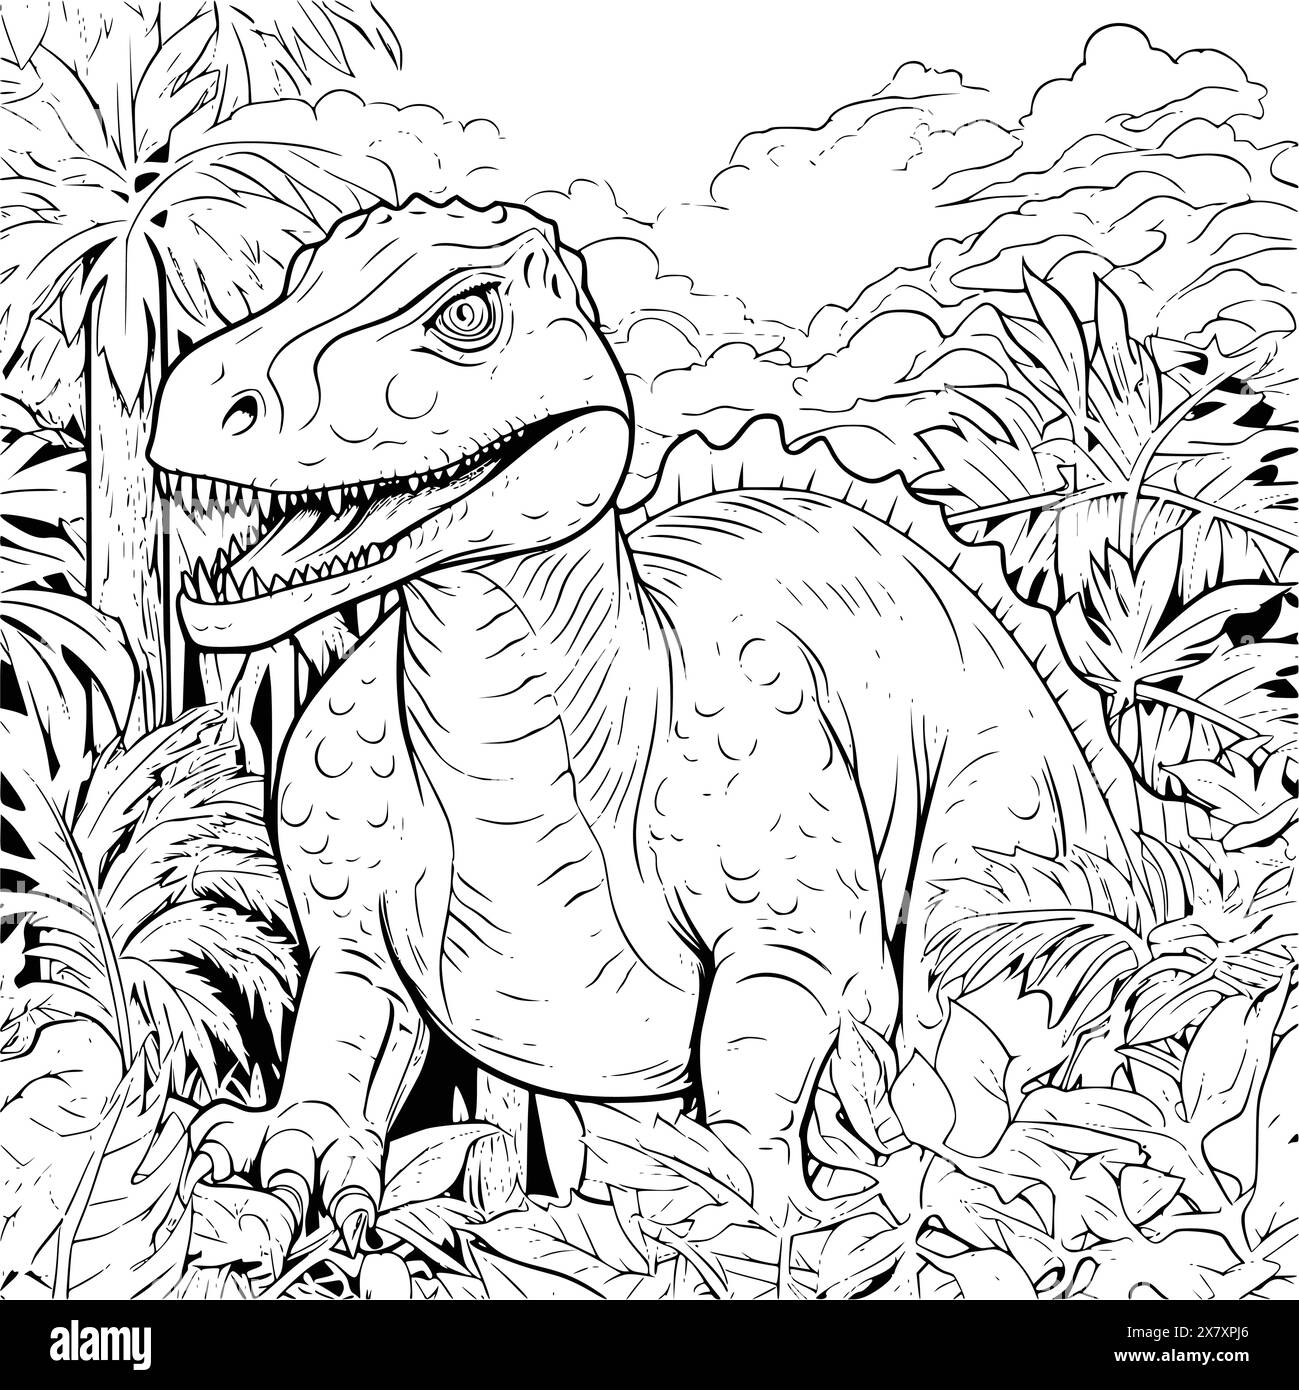 Dinosaur In A Jungle Coloring Page For Kids Stock Vector